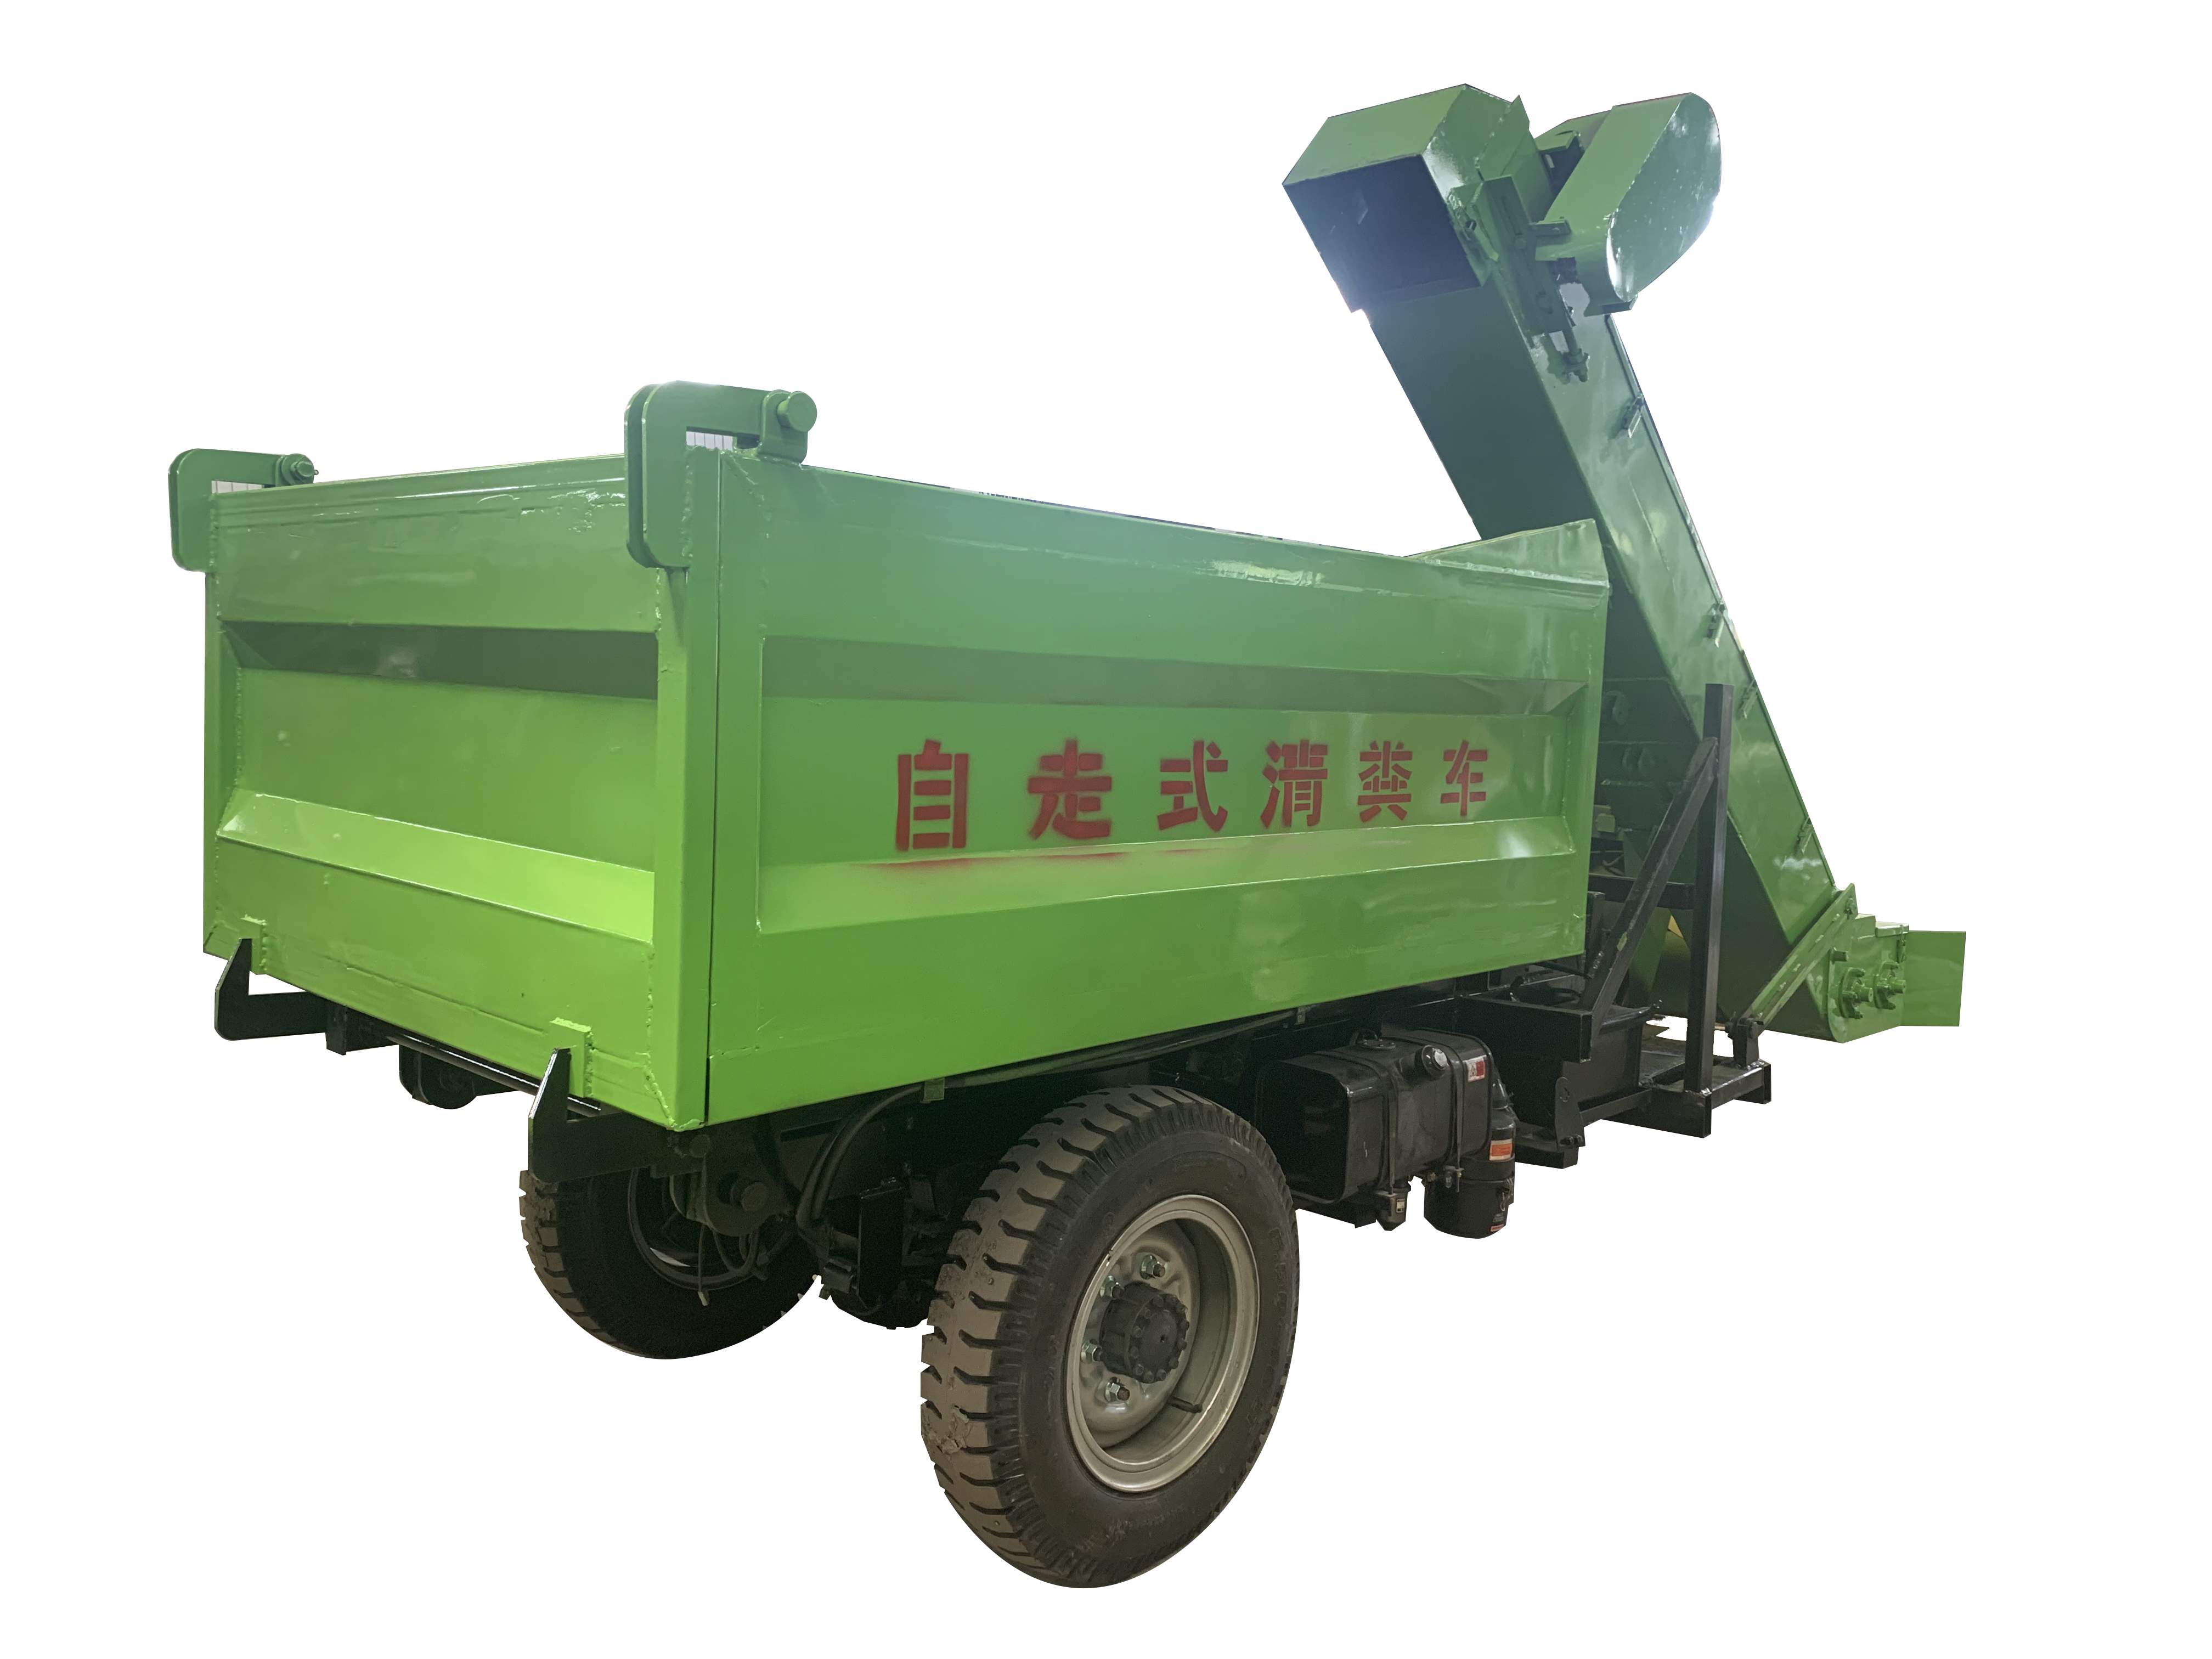 Revolutionary three-wheel truck for manure cleaning on cattle farms